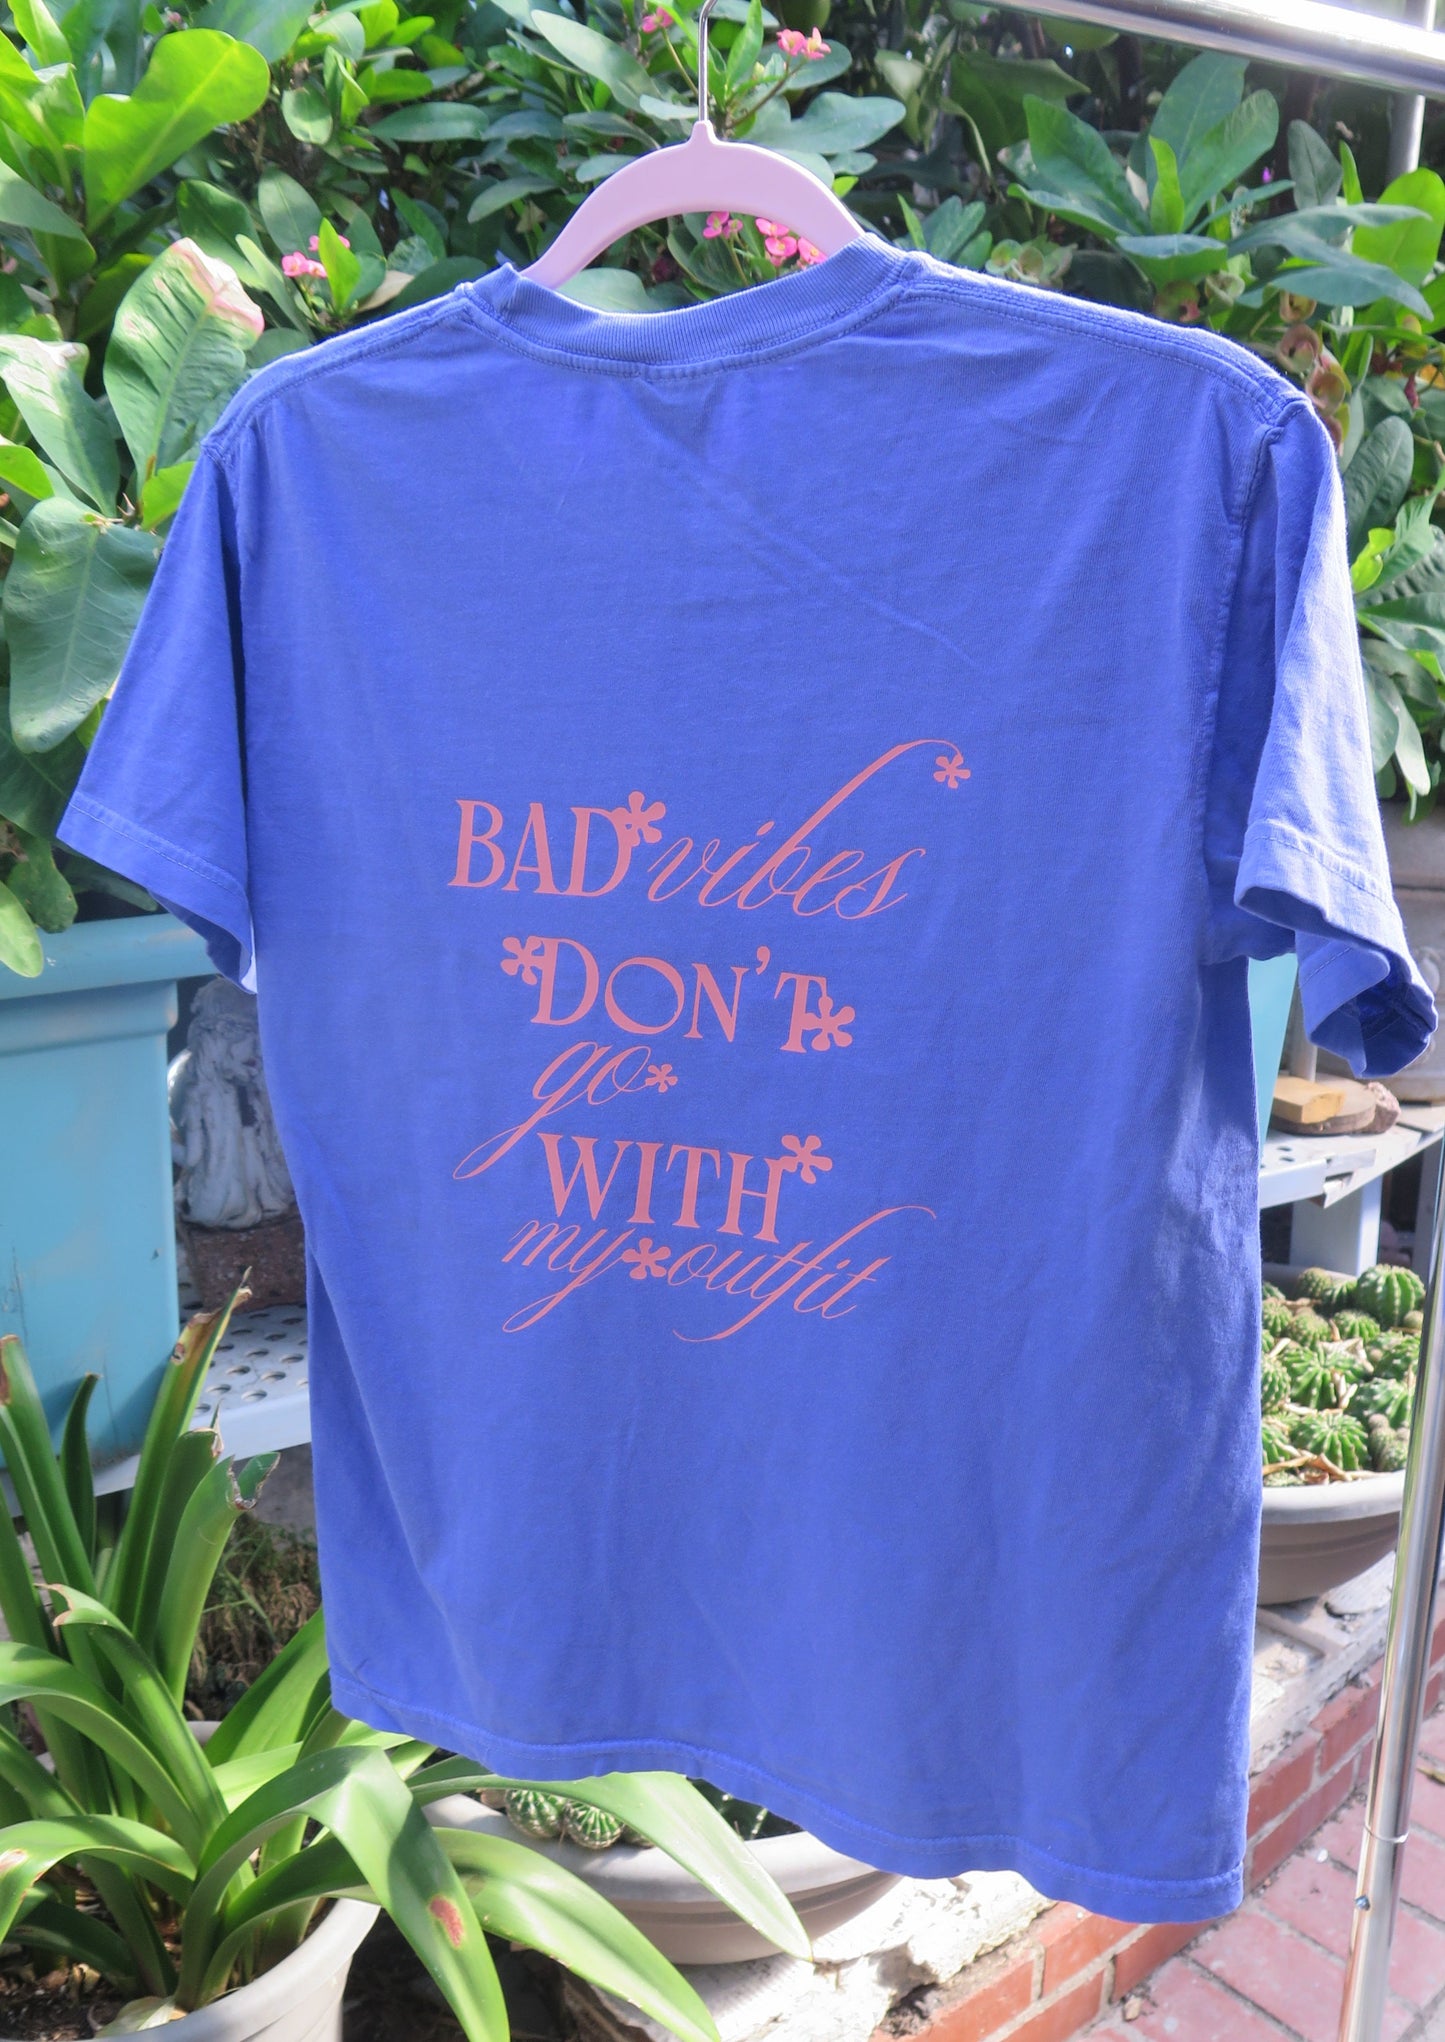 'Bad Vibes Don't Go With My Outfit' Periwinkle Tee